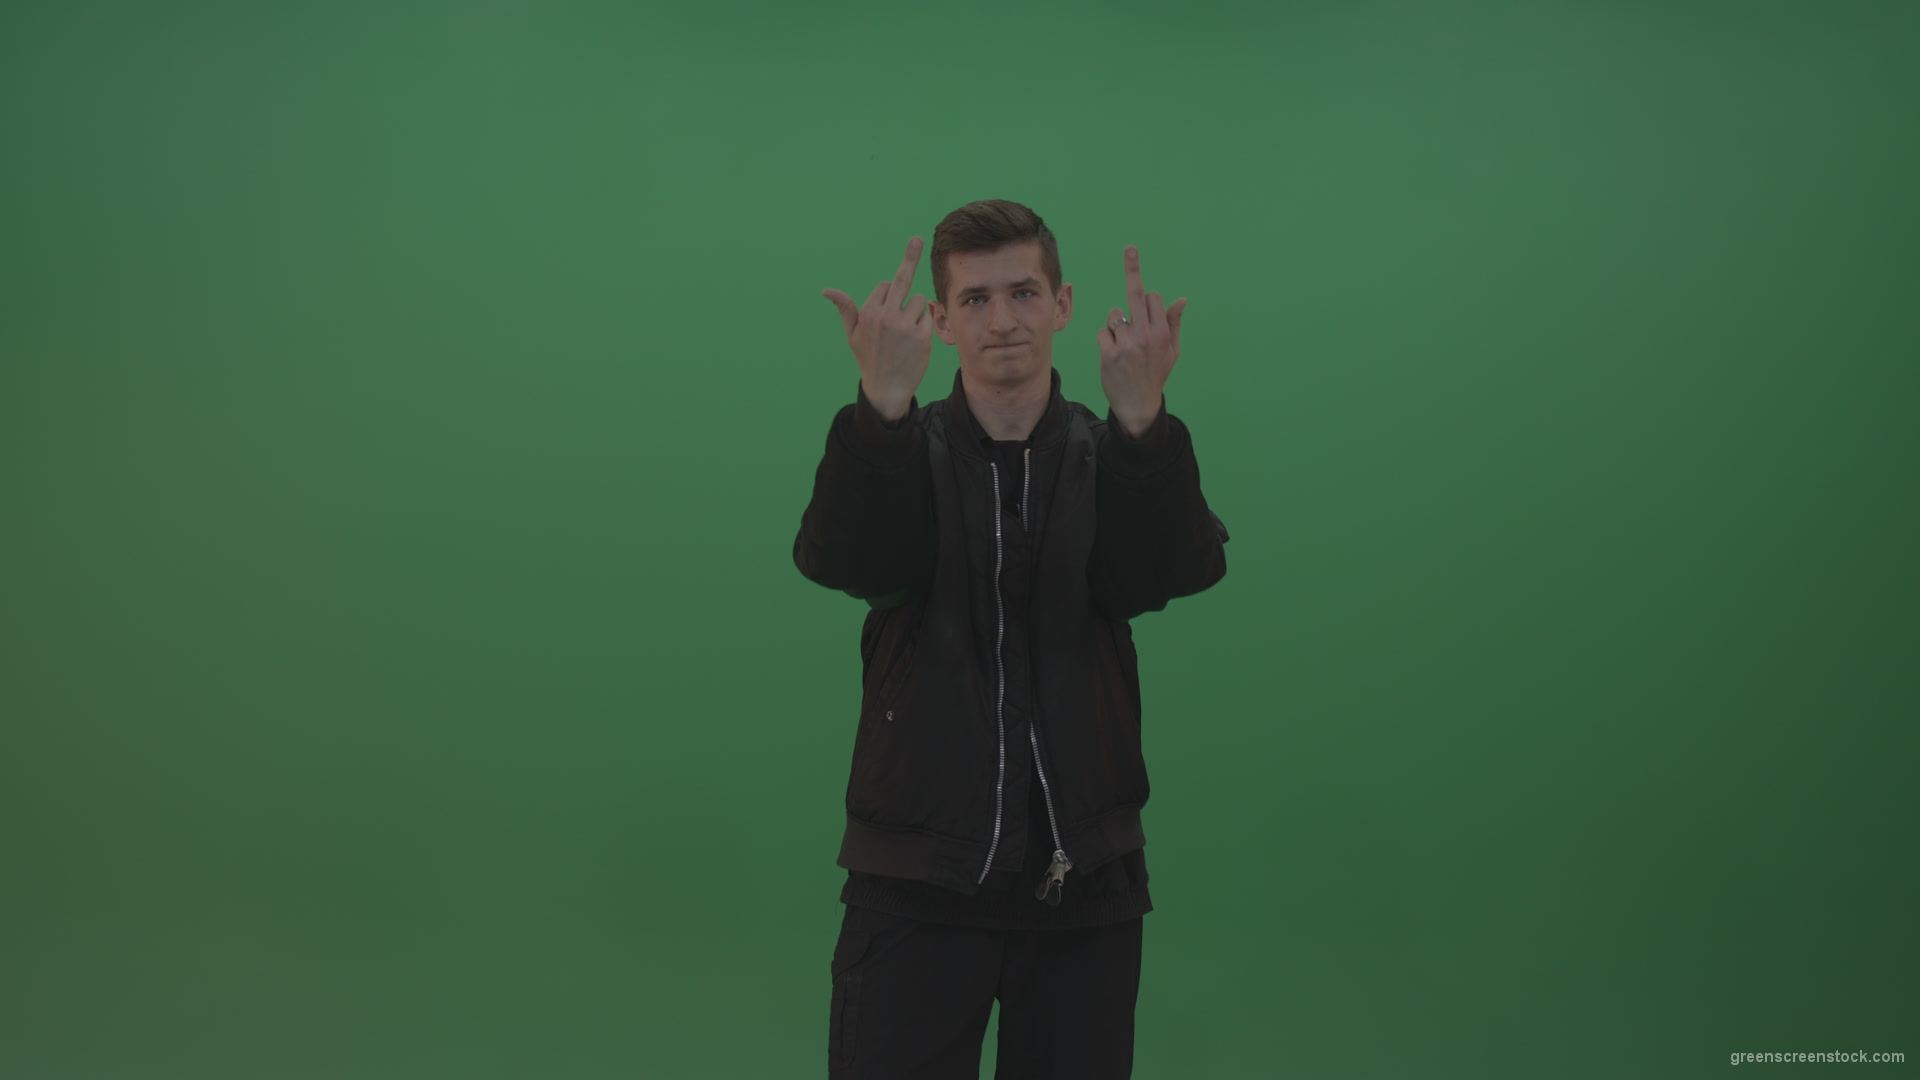 Boy-in-black-wear-displays-the-kill-sign-and-two-middle-fingers-in-the-air-over-chromakey-background_006 Green Screen Stock